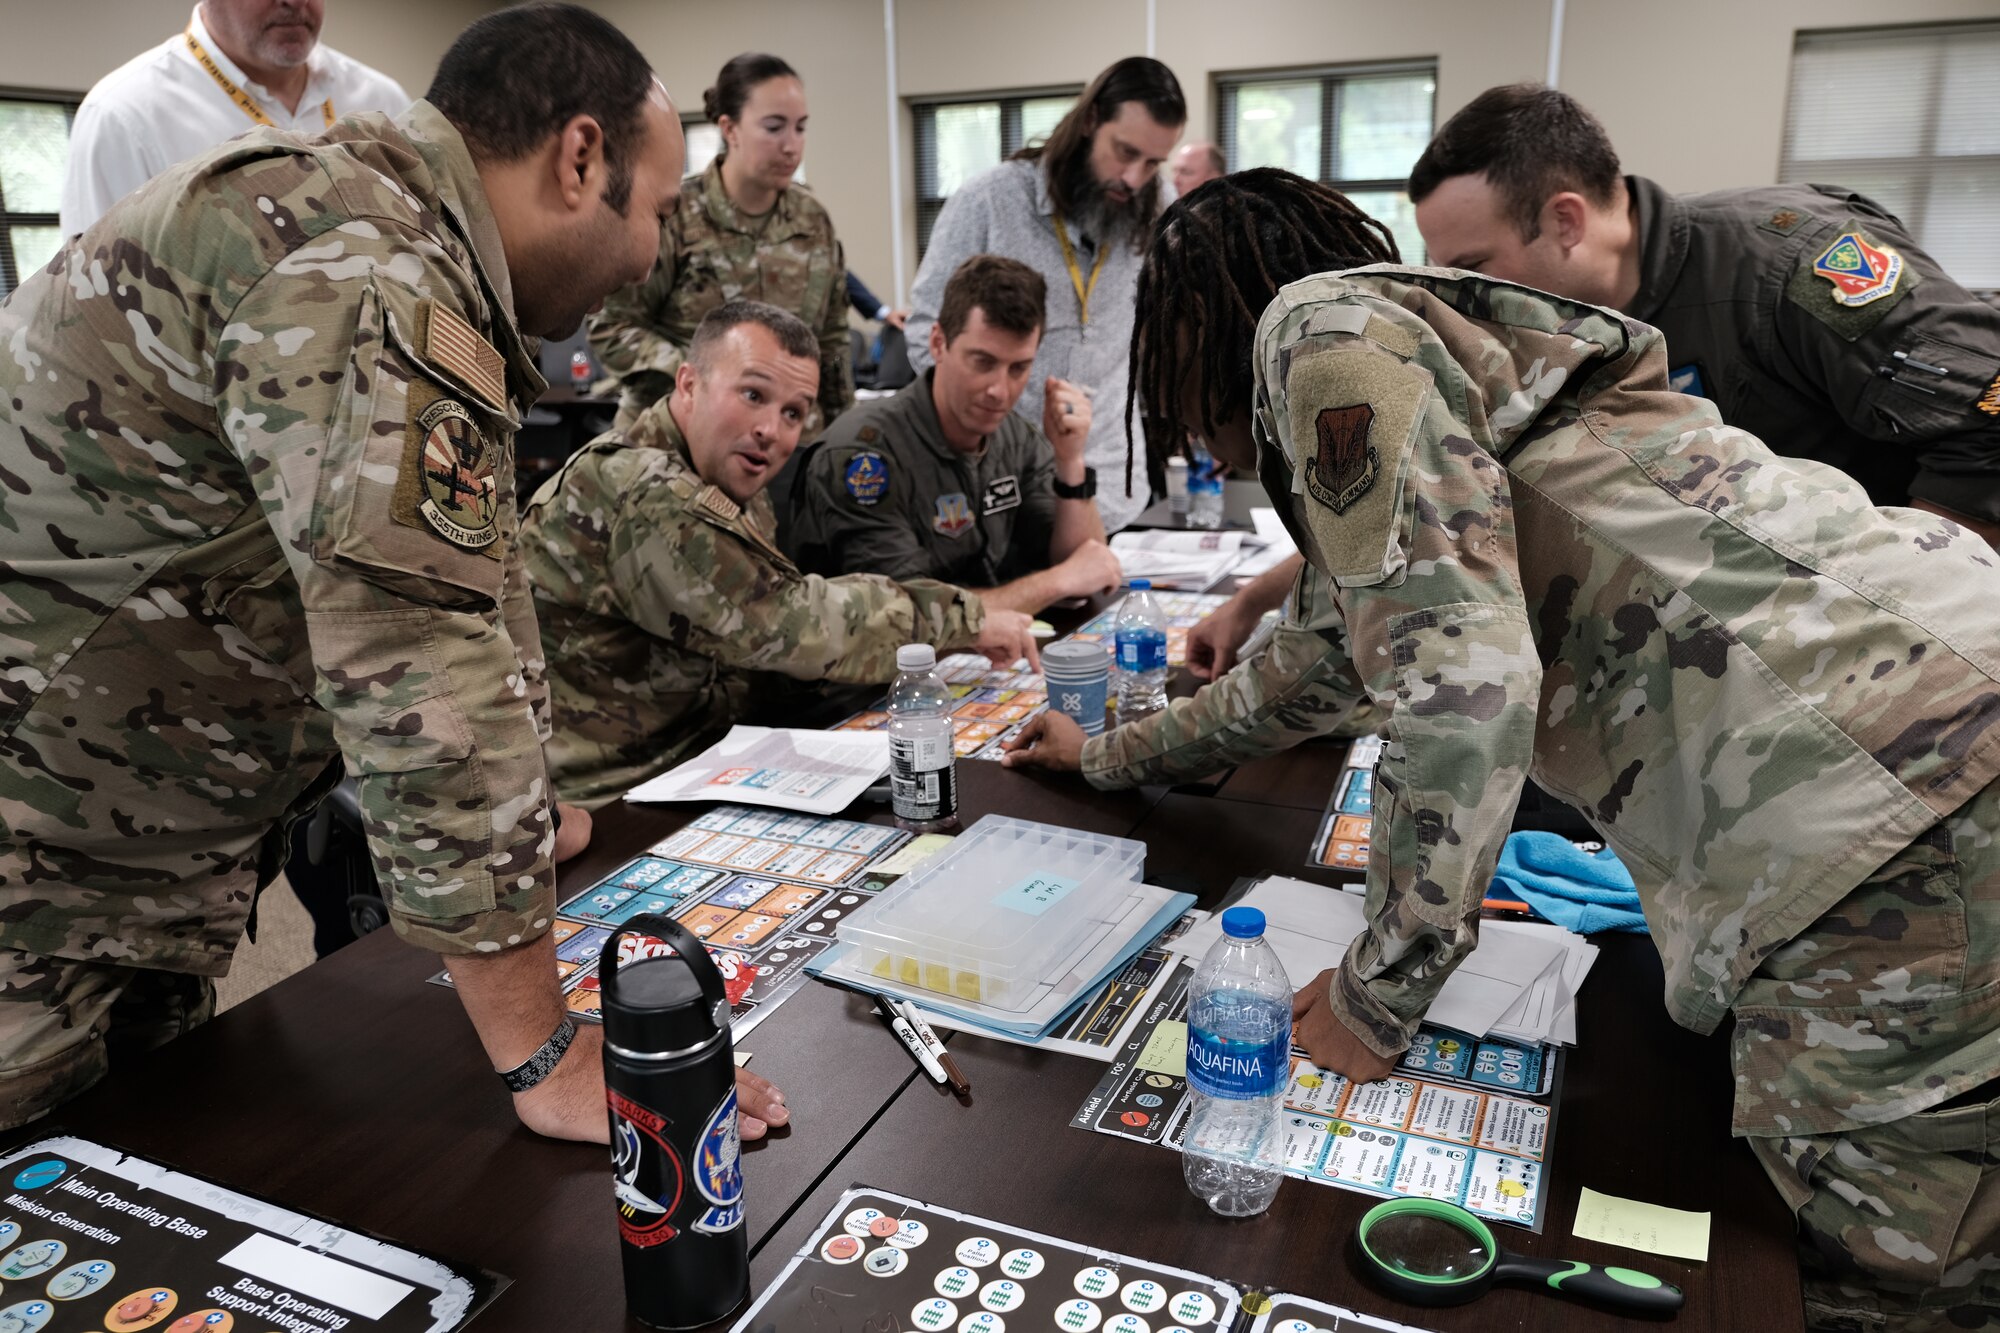 photo of a group of US military standing and sitting around a table looking at map